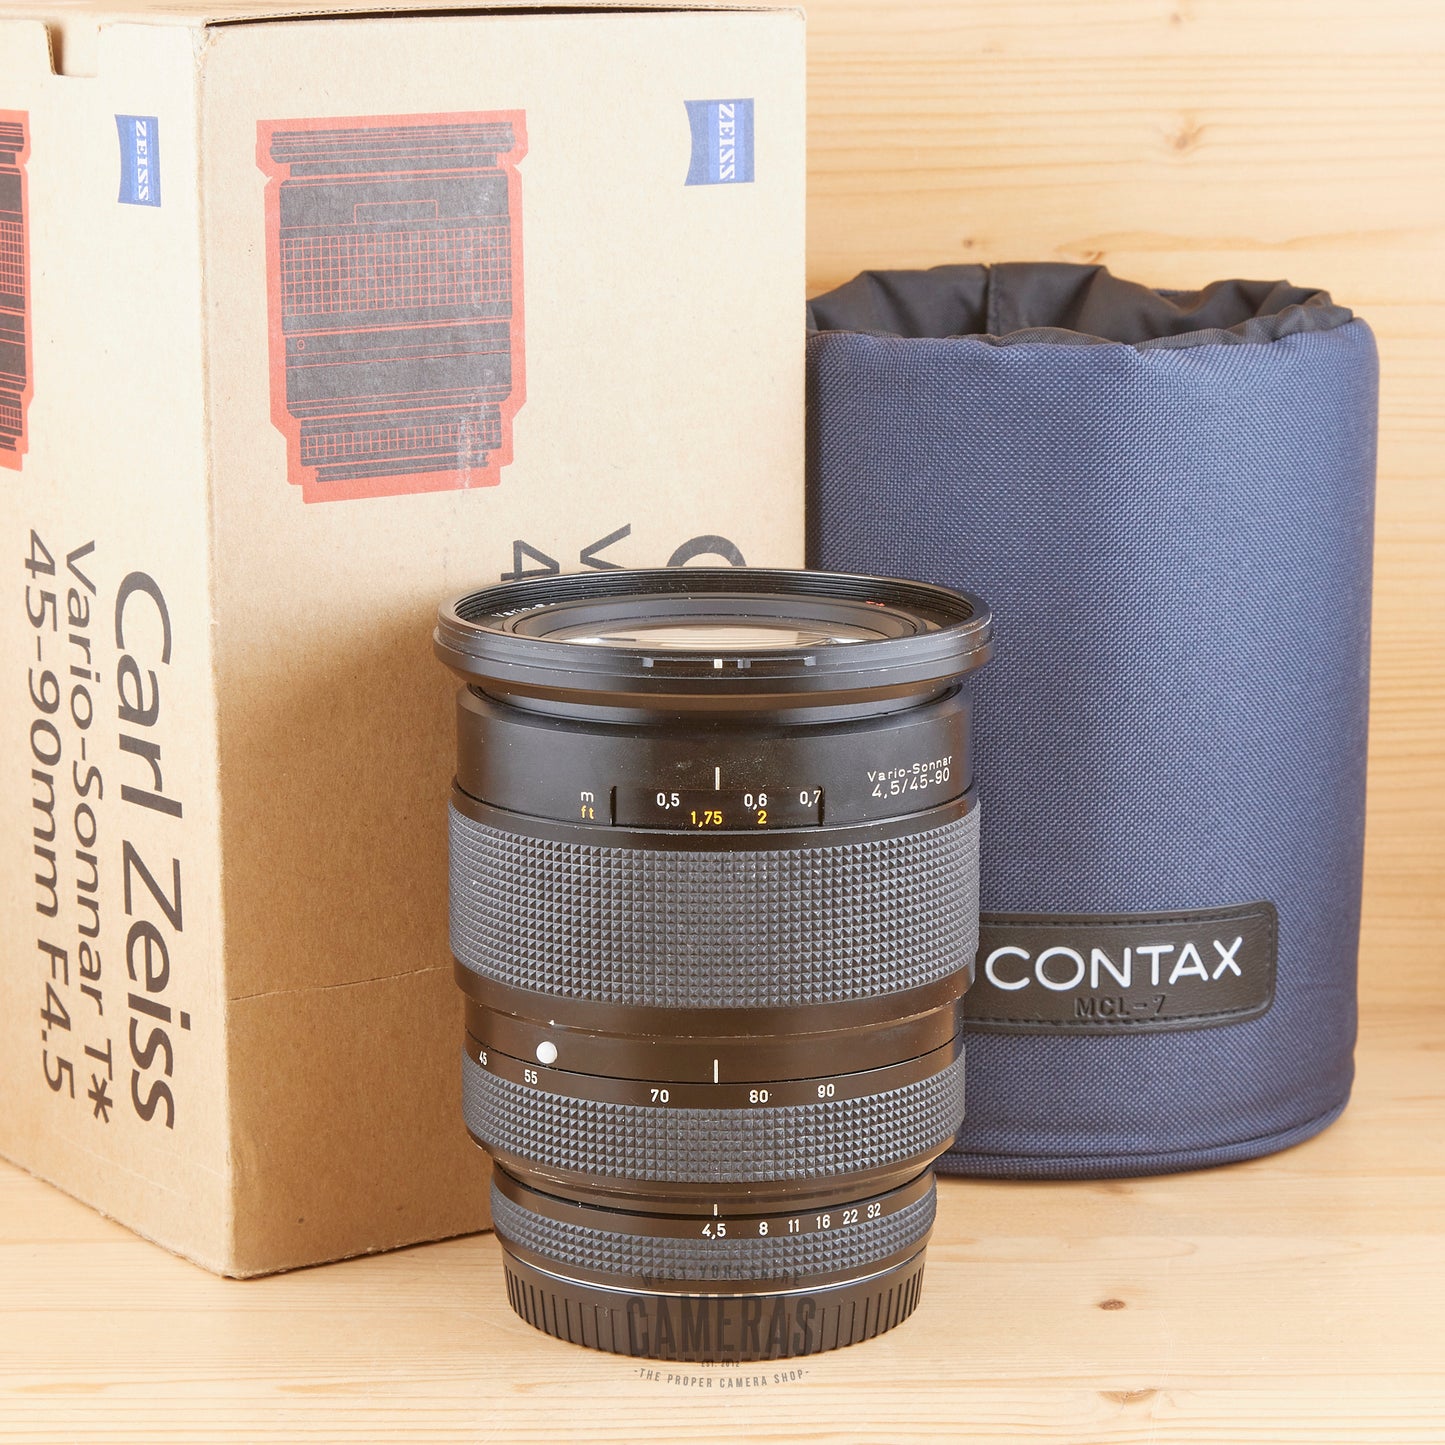 Contax 645 Zeiss 45-90mm f/4.5 Vario-Sonnar T* Avg Boxed